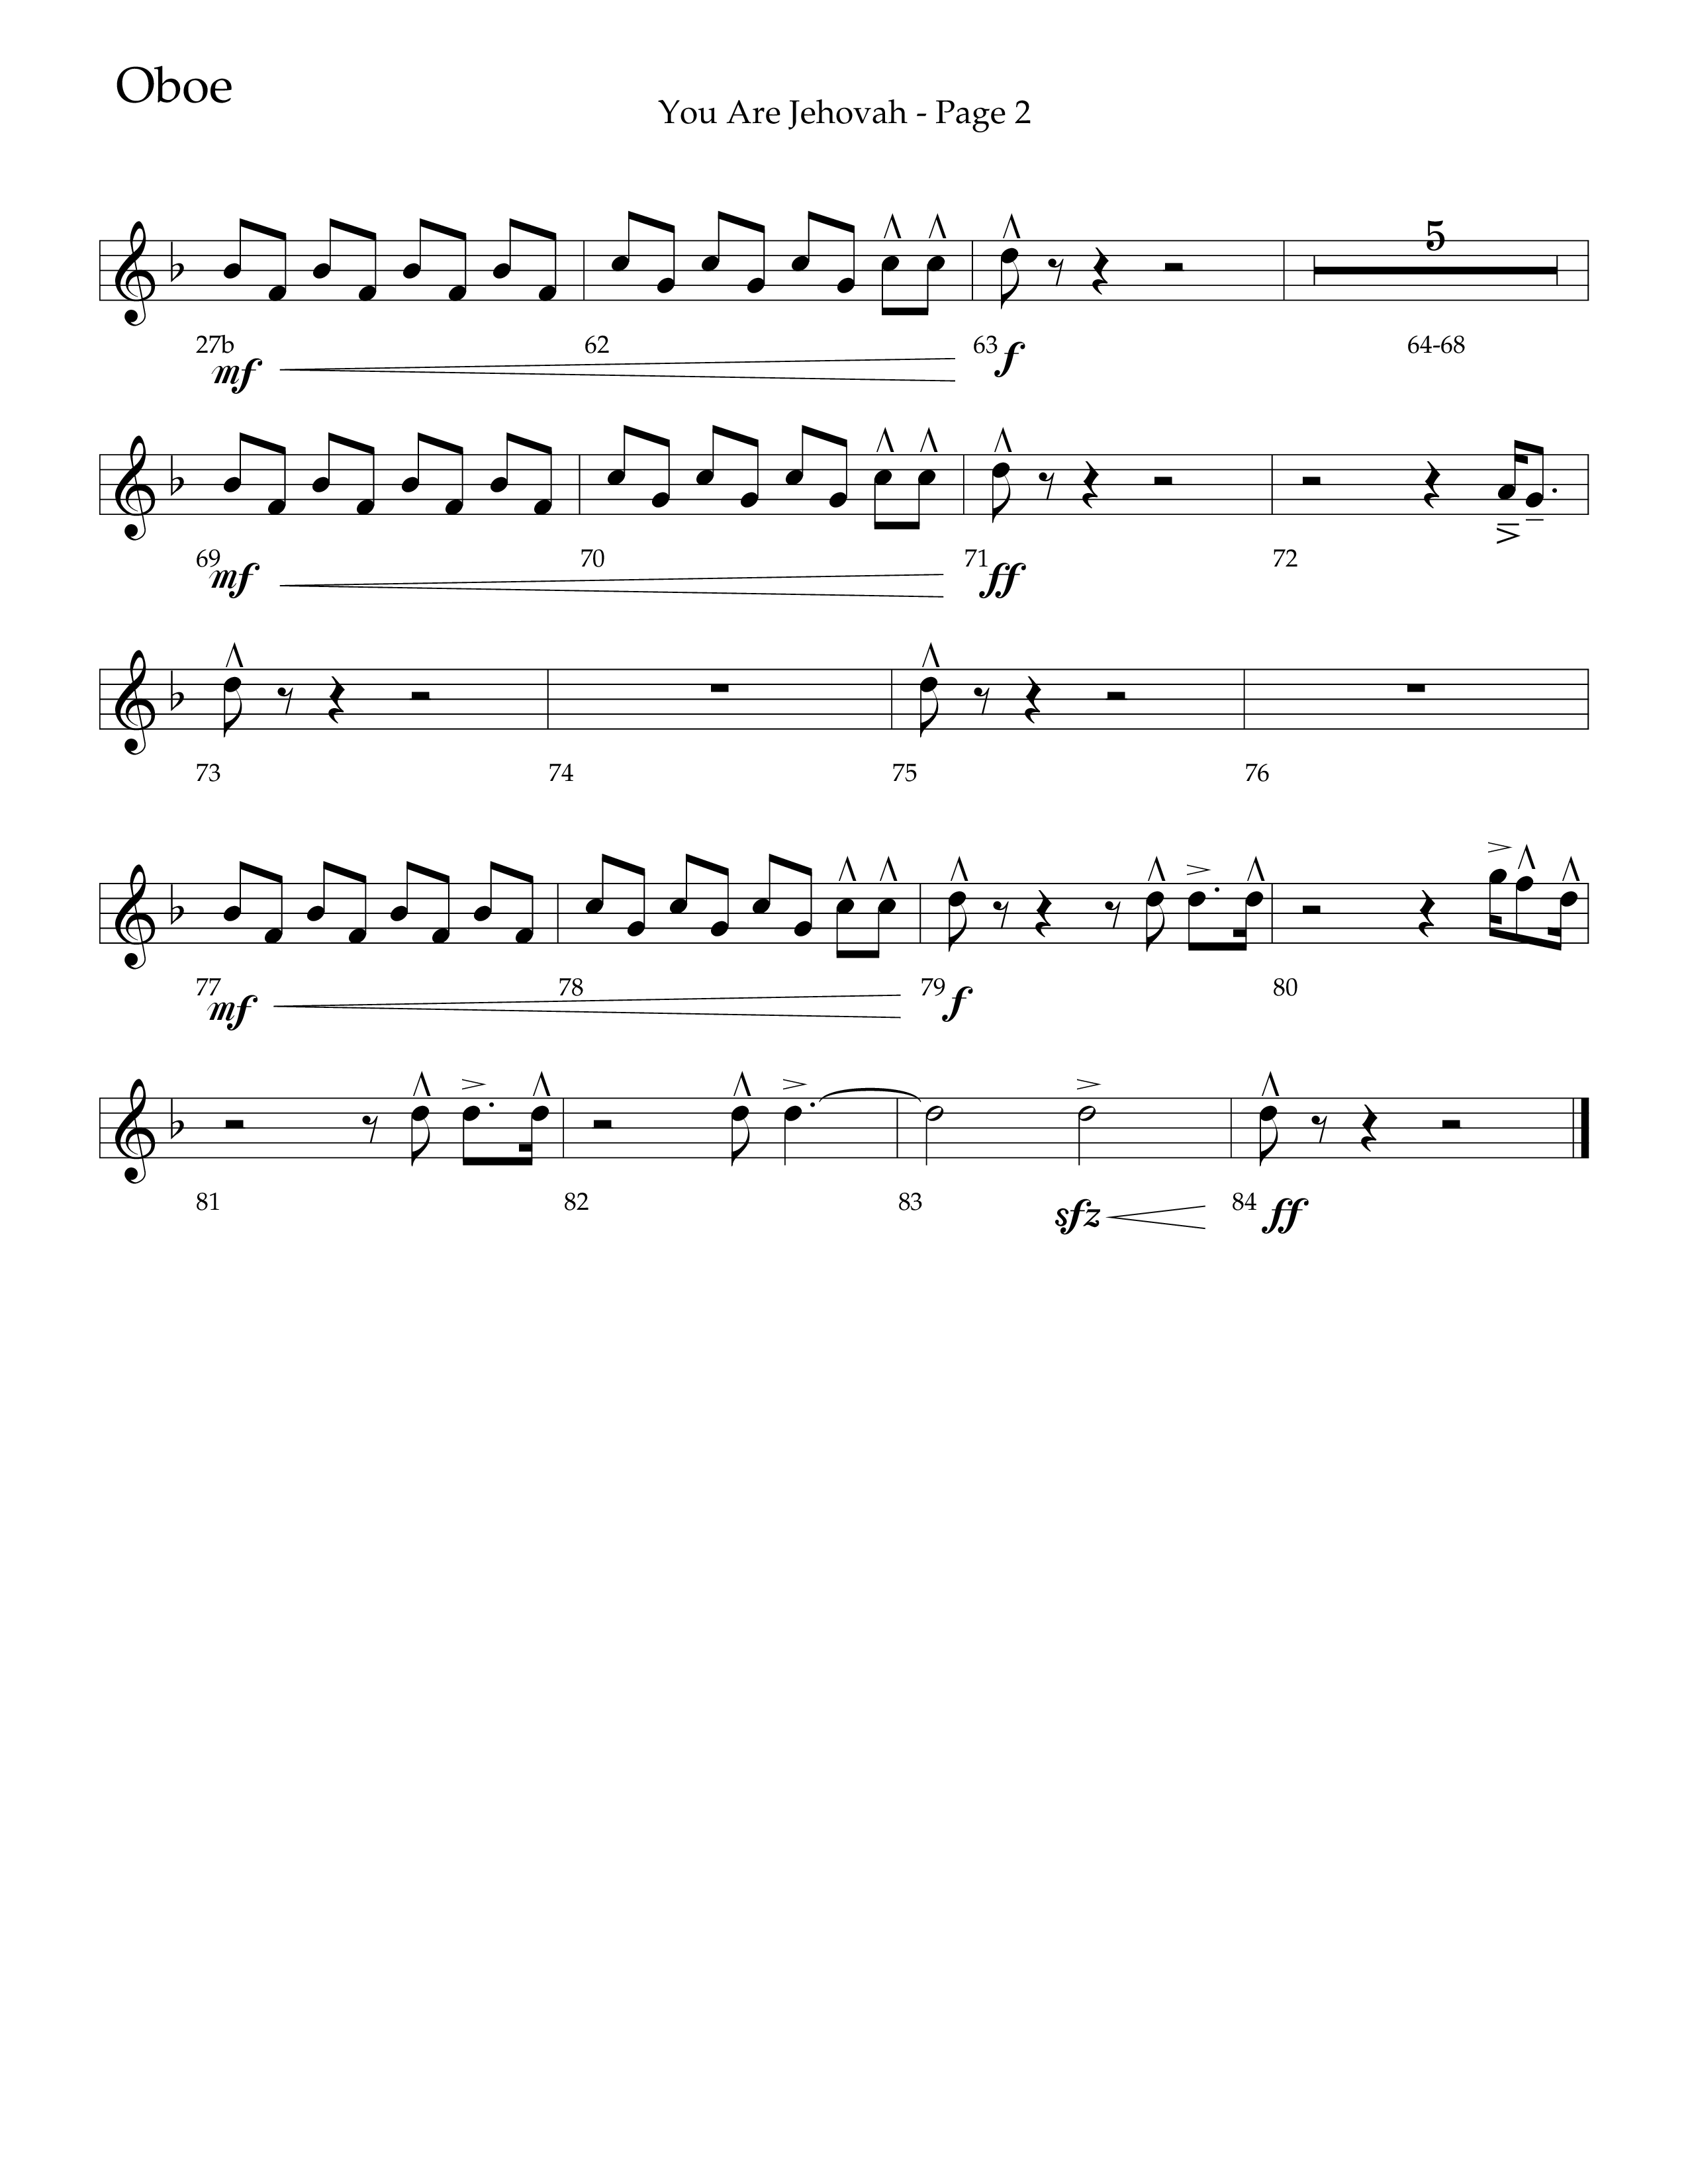 You Are Jehovah (Choral Anthem SATB) Oboe (Lifeway Choral / Arr. Cliff Duren)